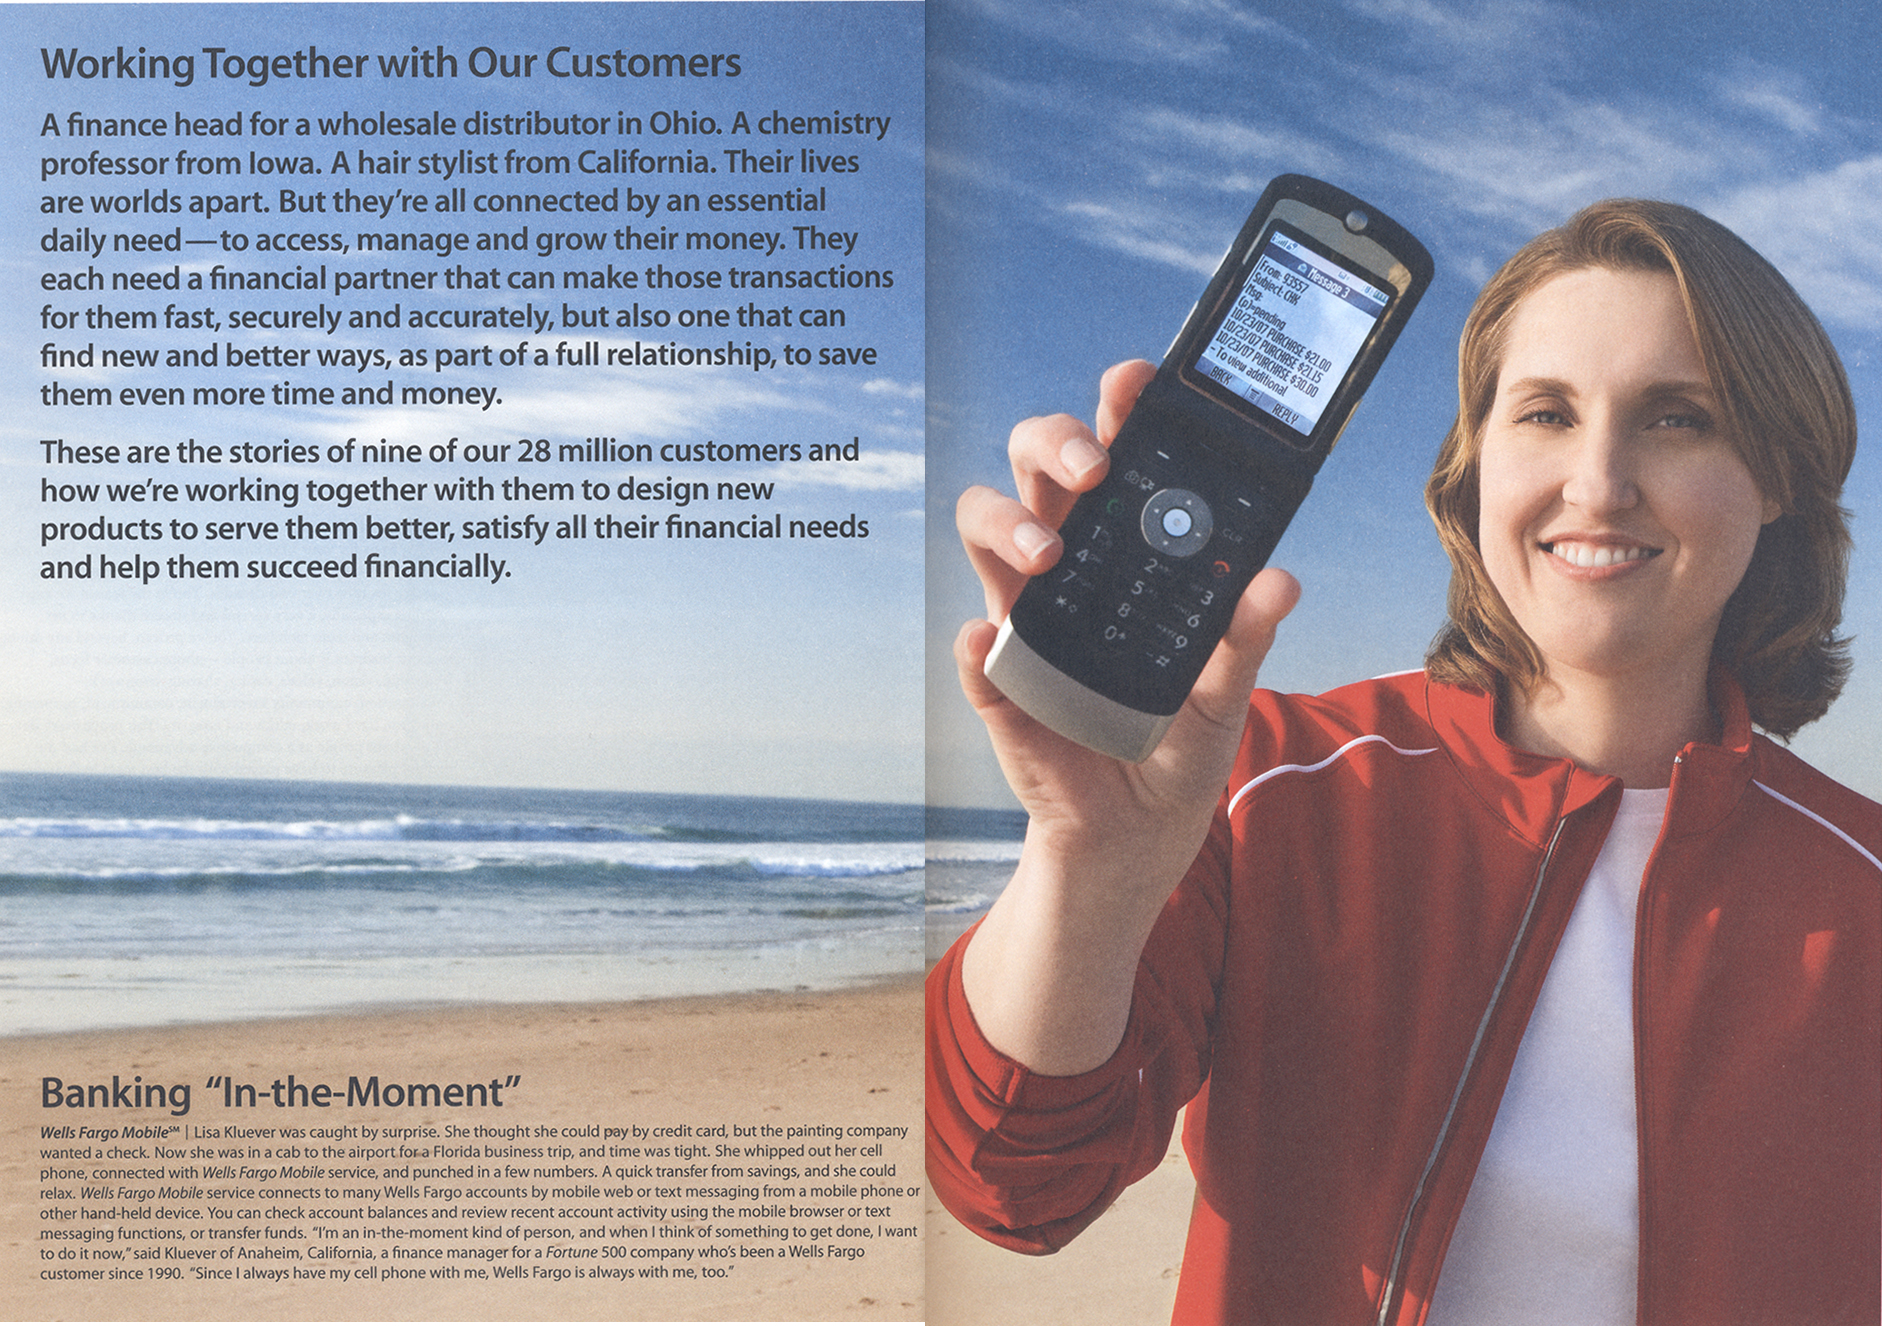 An advertisement featuring a wide shot of an ocean and beach. On the far right a woman in a red jacket holds up a flip phone. On the phone screen is a bank transaction record. Ad titled: Working together with our customers. Banking “In the moment”.